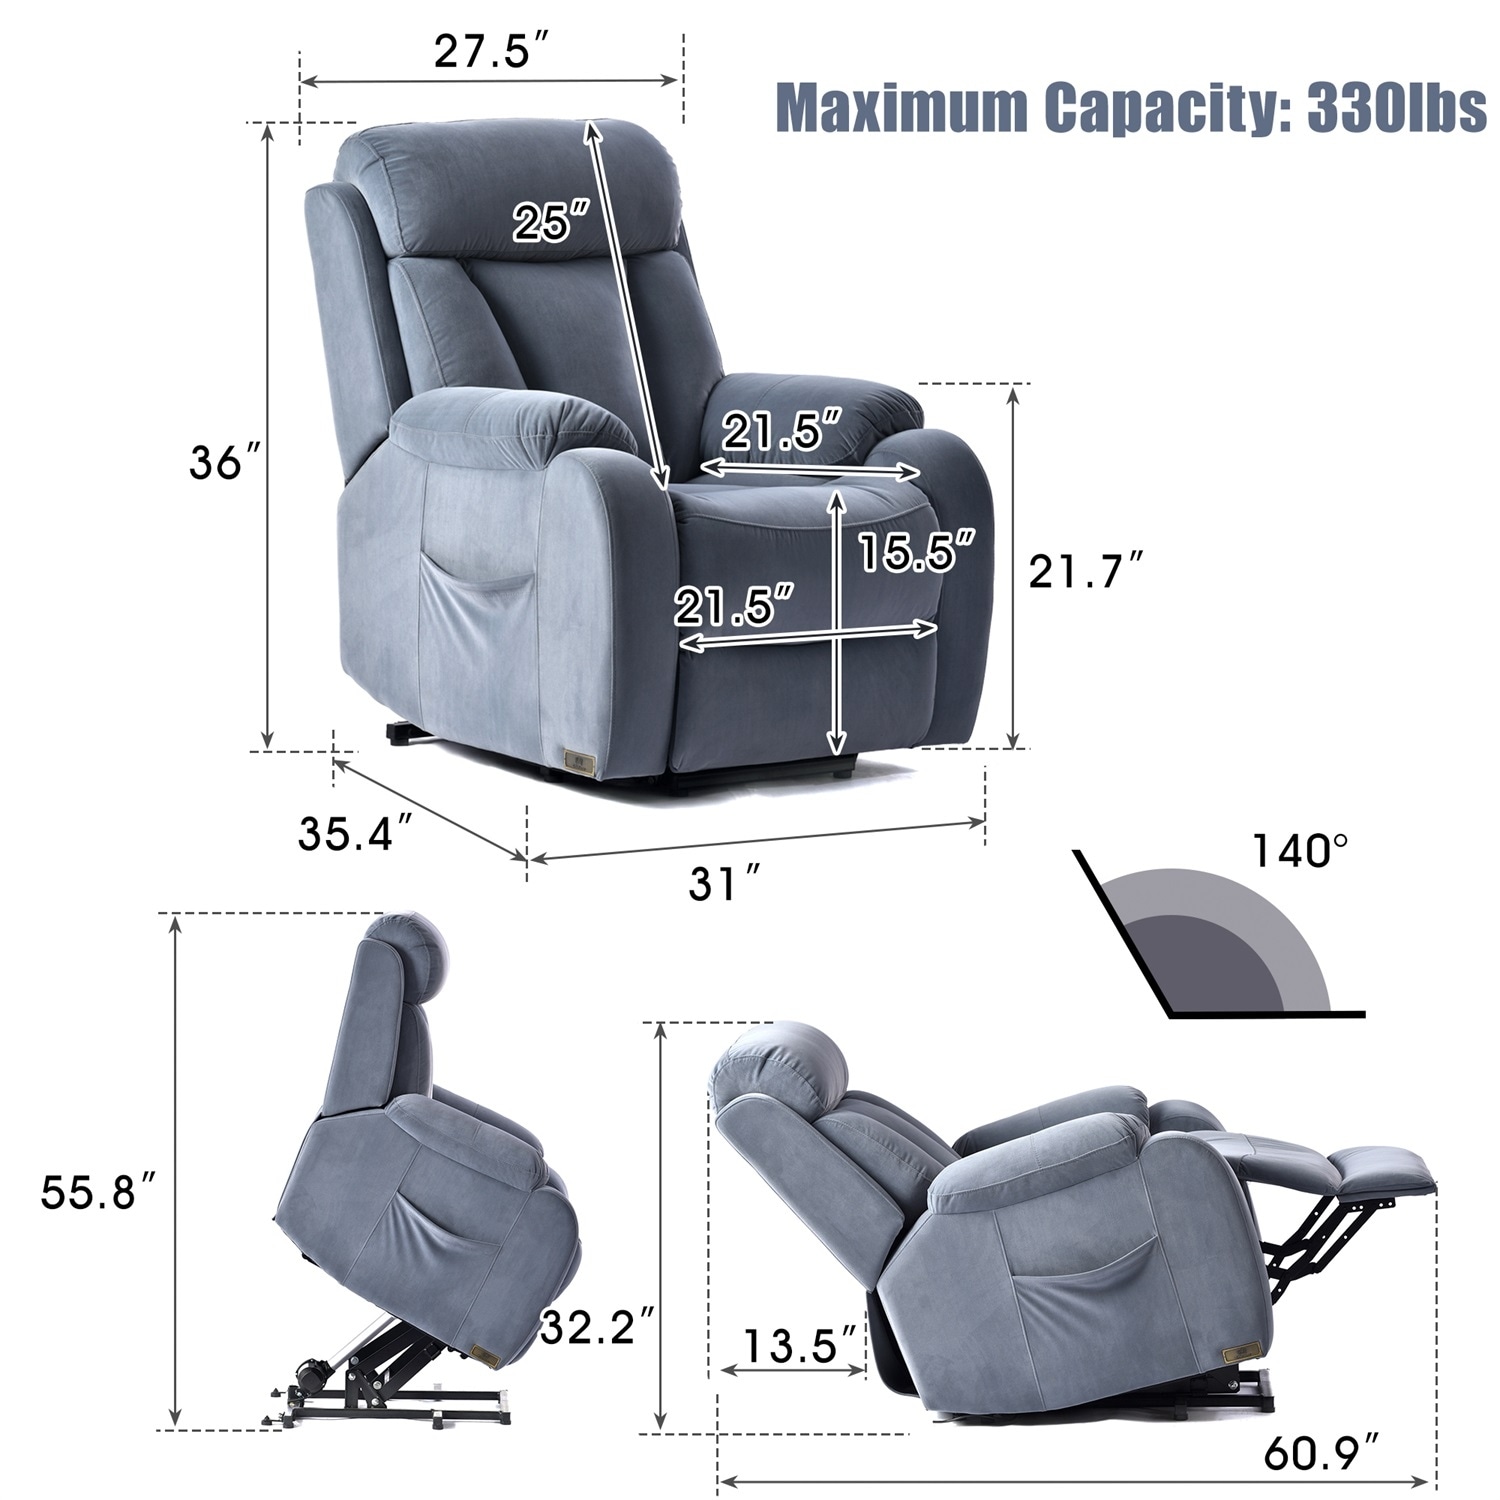 Merax Soft Fabric Upholstery Power Lift Recliner Chair with Remote